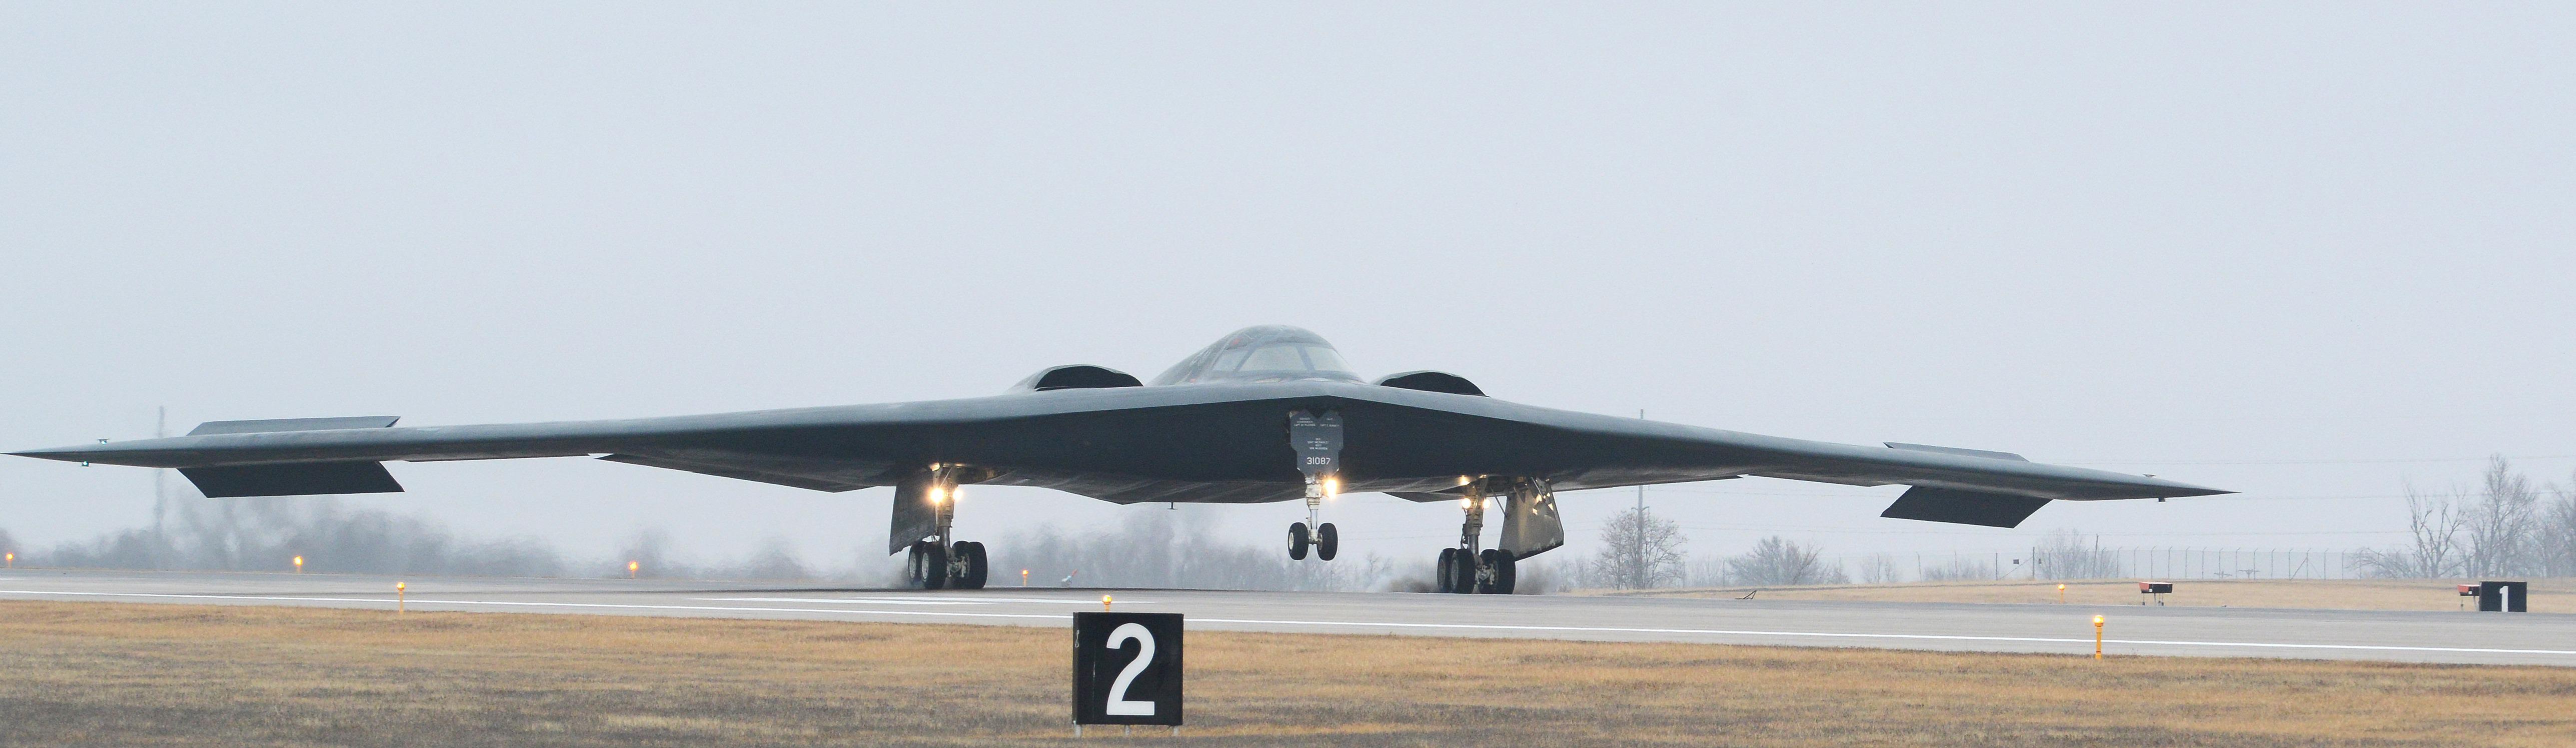 A U.S. Air Force B-2 Spirit stealth bomber aircraft lands on the flight line at the Whiteman Air Force Base January 19, 2017, near Knob Noster, Missouri. (photo by Joel Pfiester/US Air Force via Planetpix)